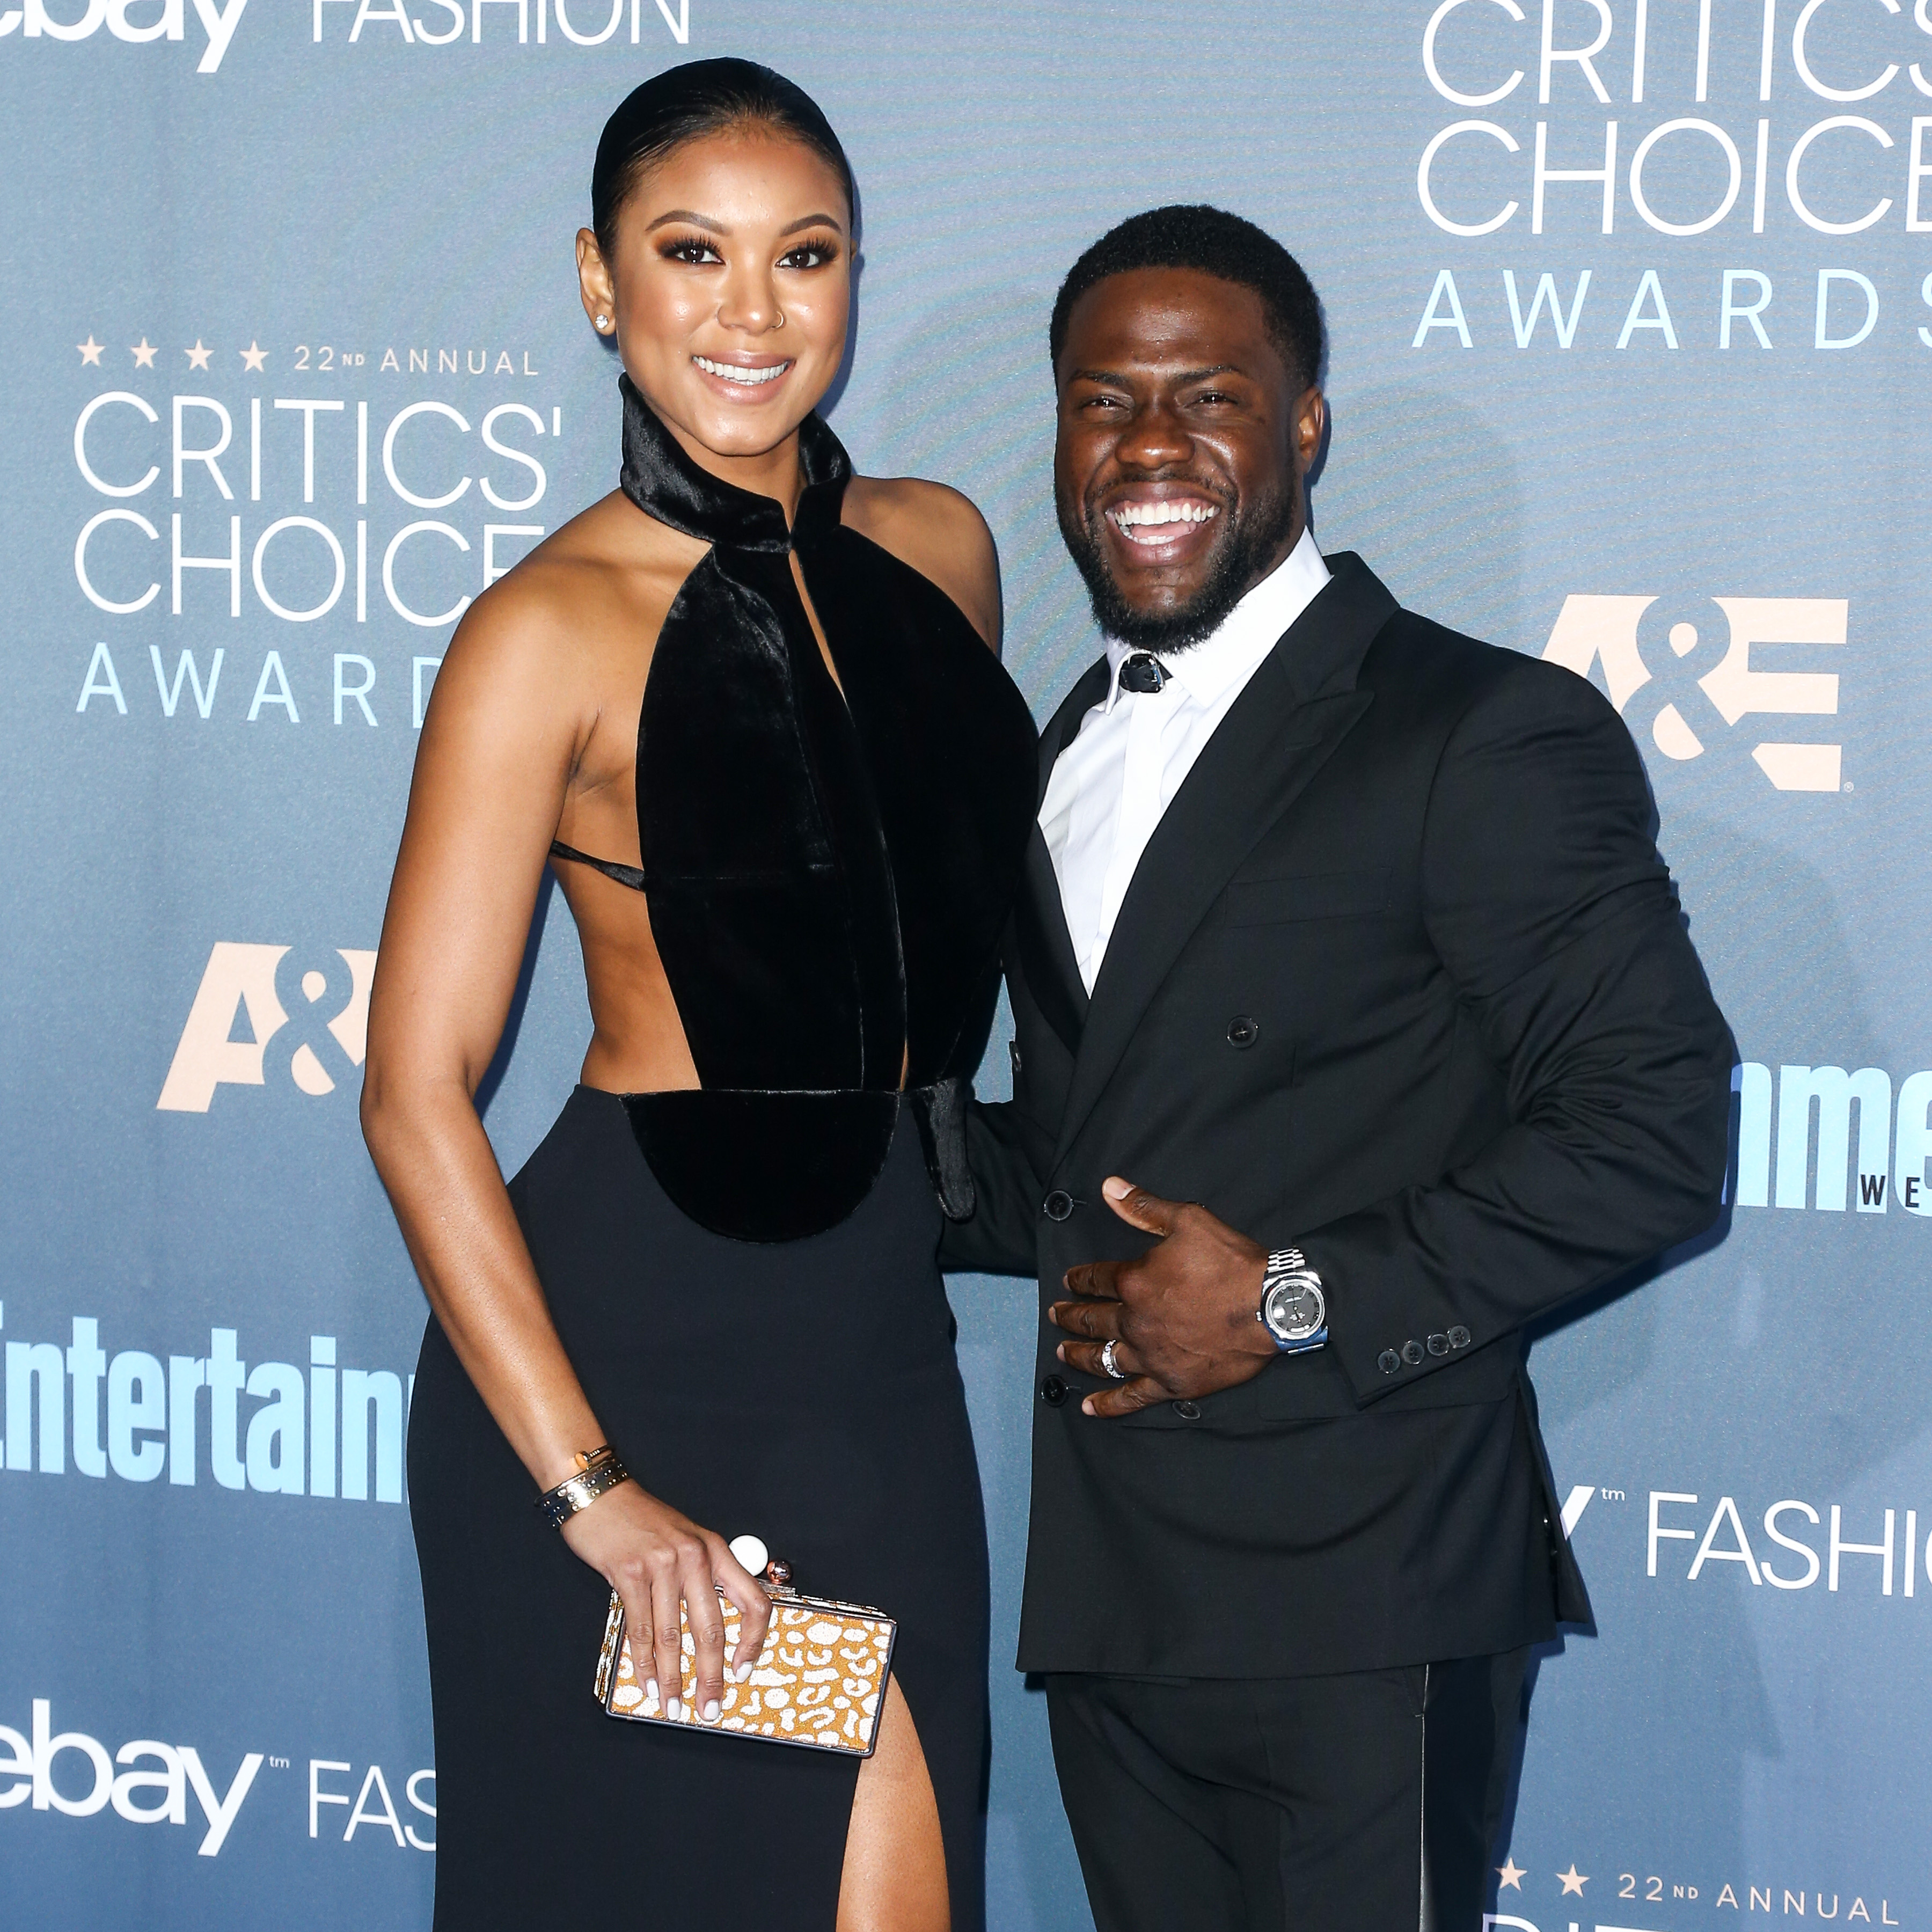 Kevin Hart and Wife Eniko Parrish Are Expecting Their First Baby Toget photo